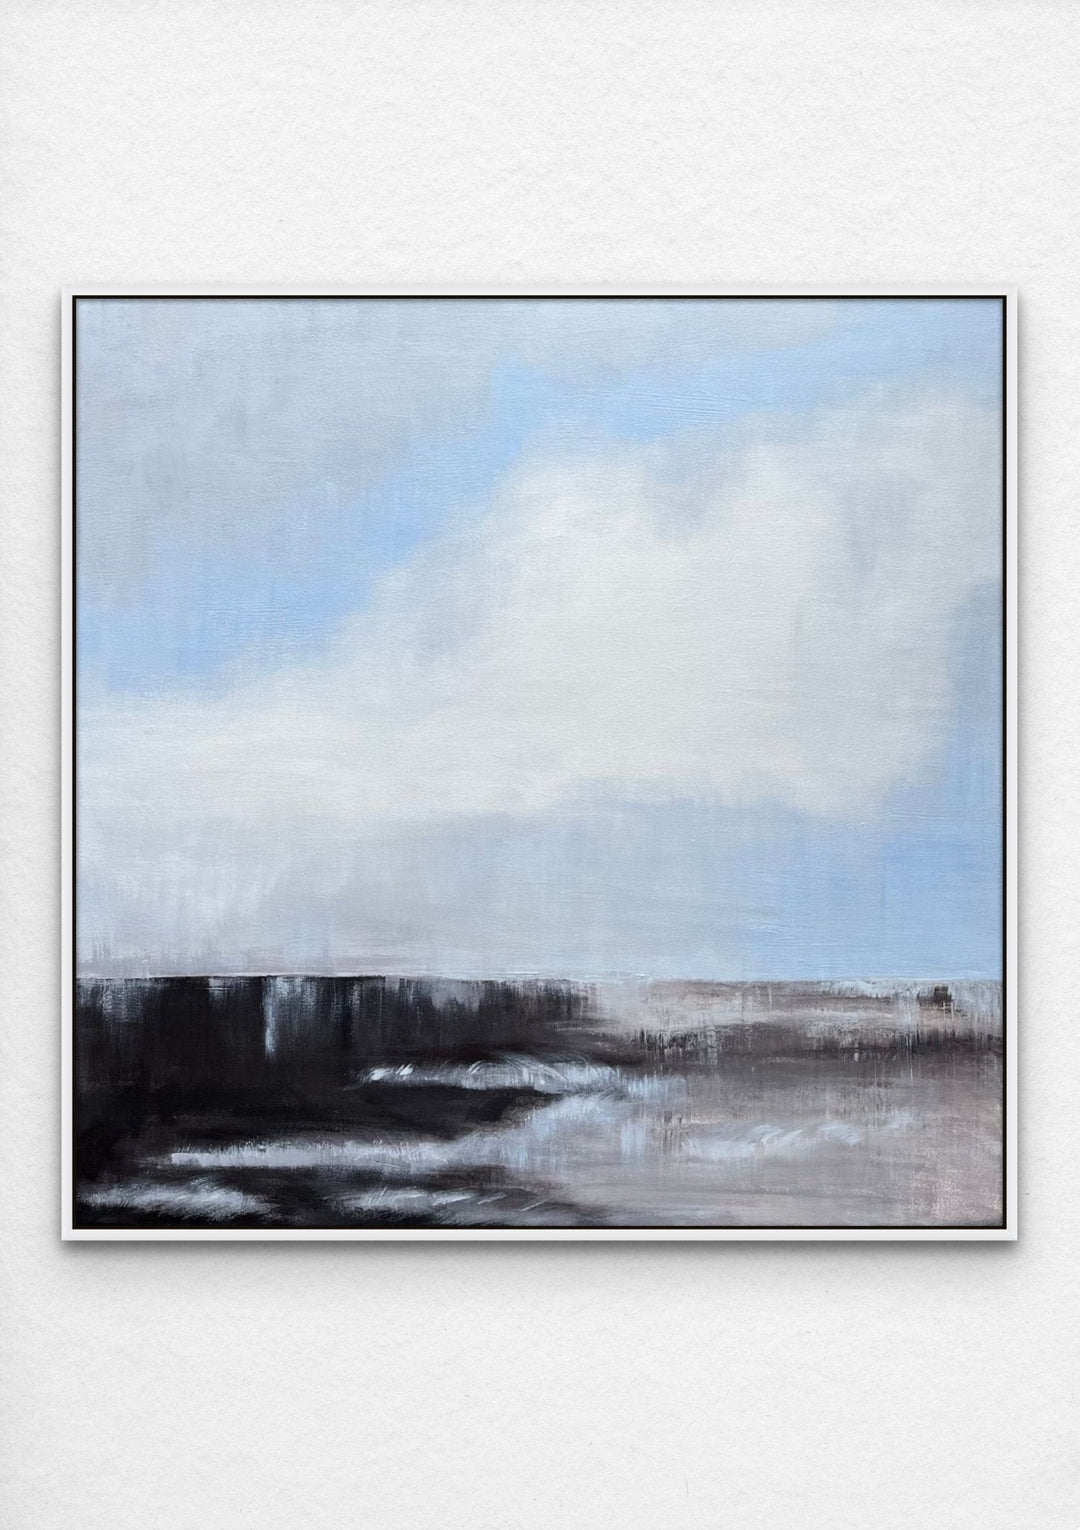 Powder blue sky with large cloud over a dark abstract landscape with white frame by Engeline Logtenberg. 